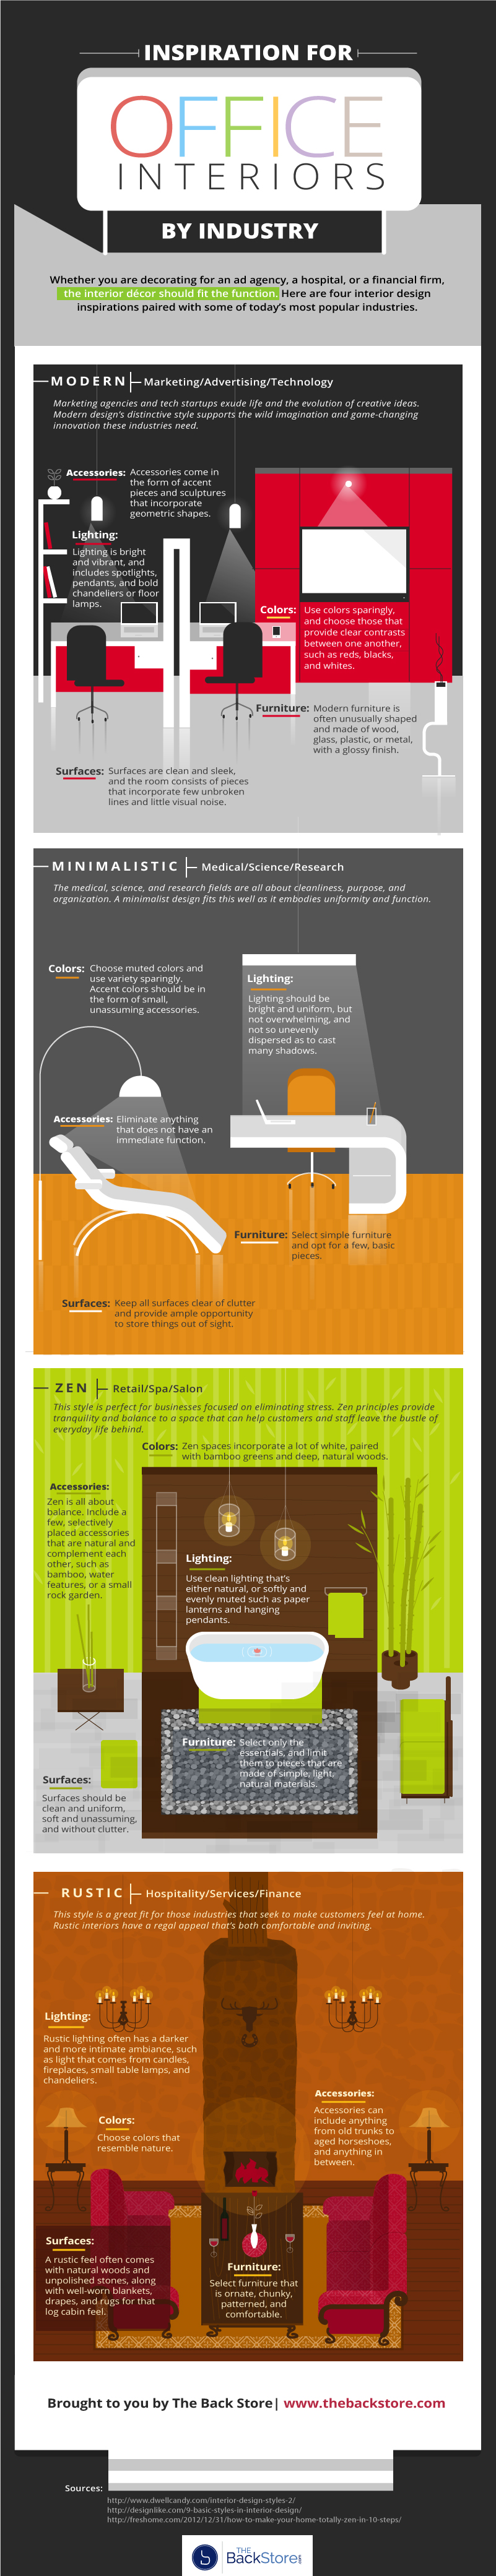 office interiors by industry infographic